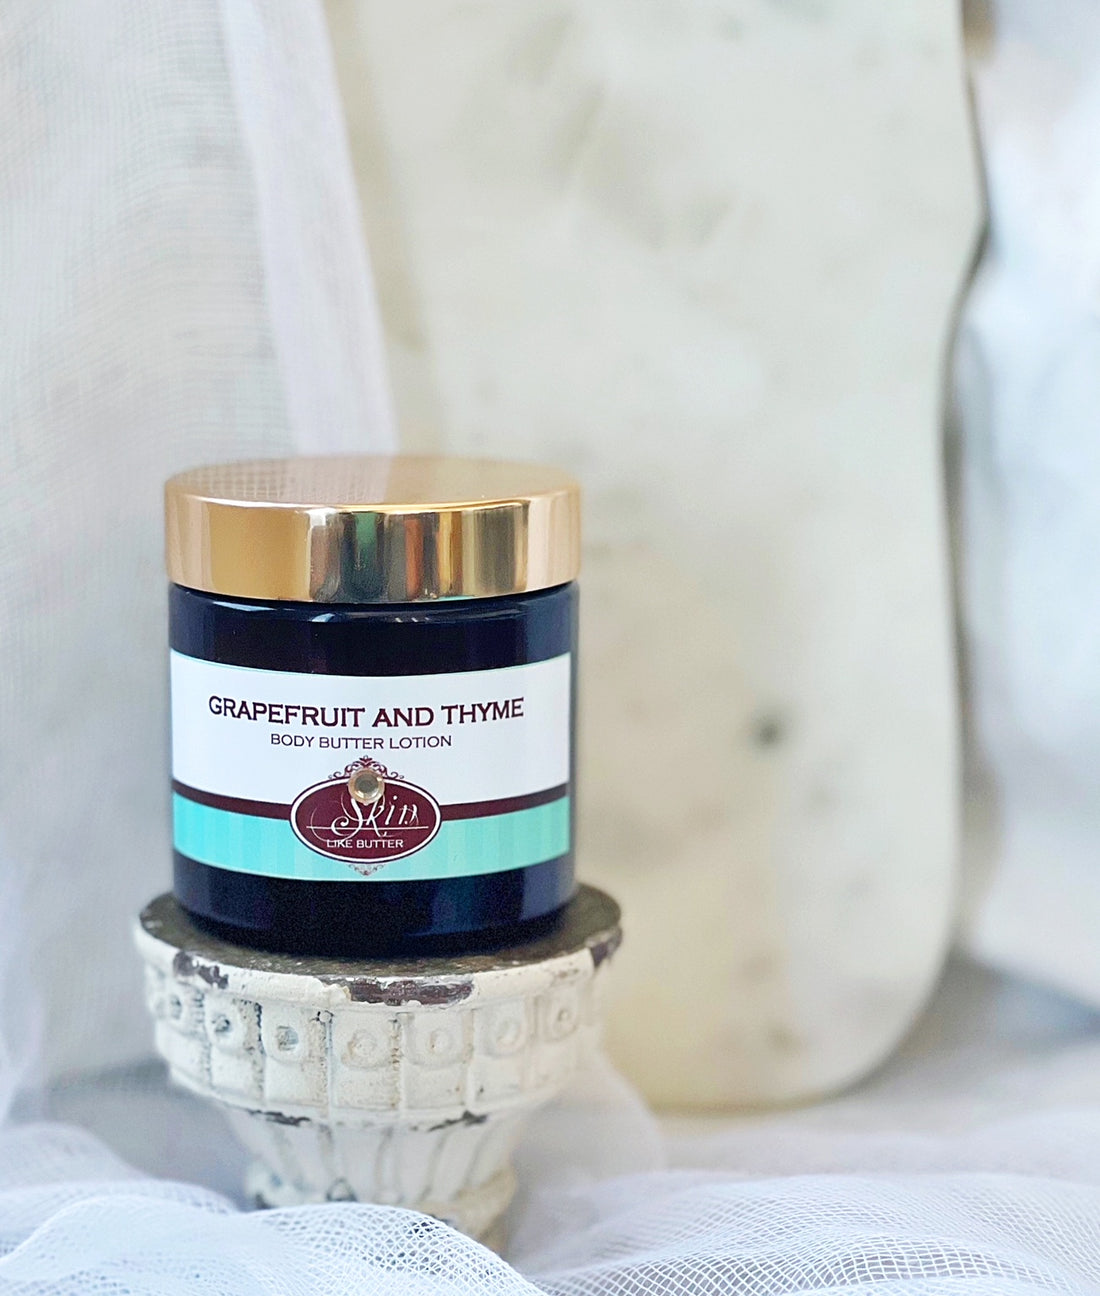 SEA SALT scented water free, vegan non-greasy Body Butter